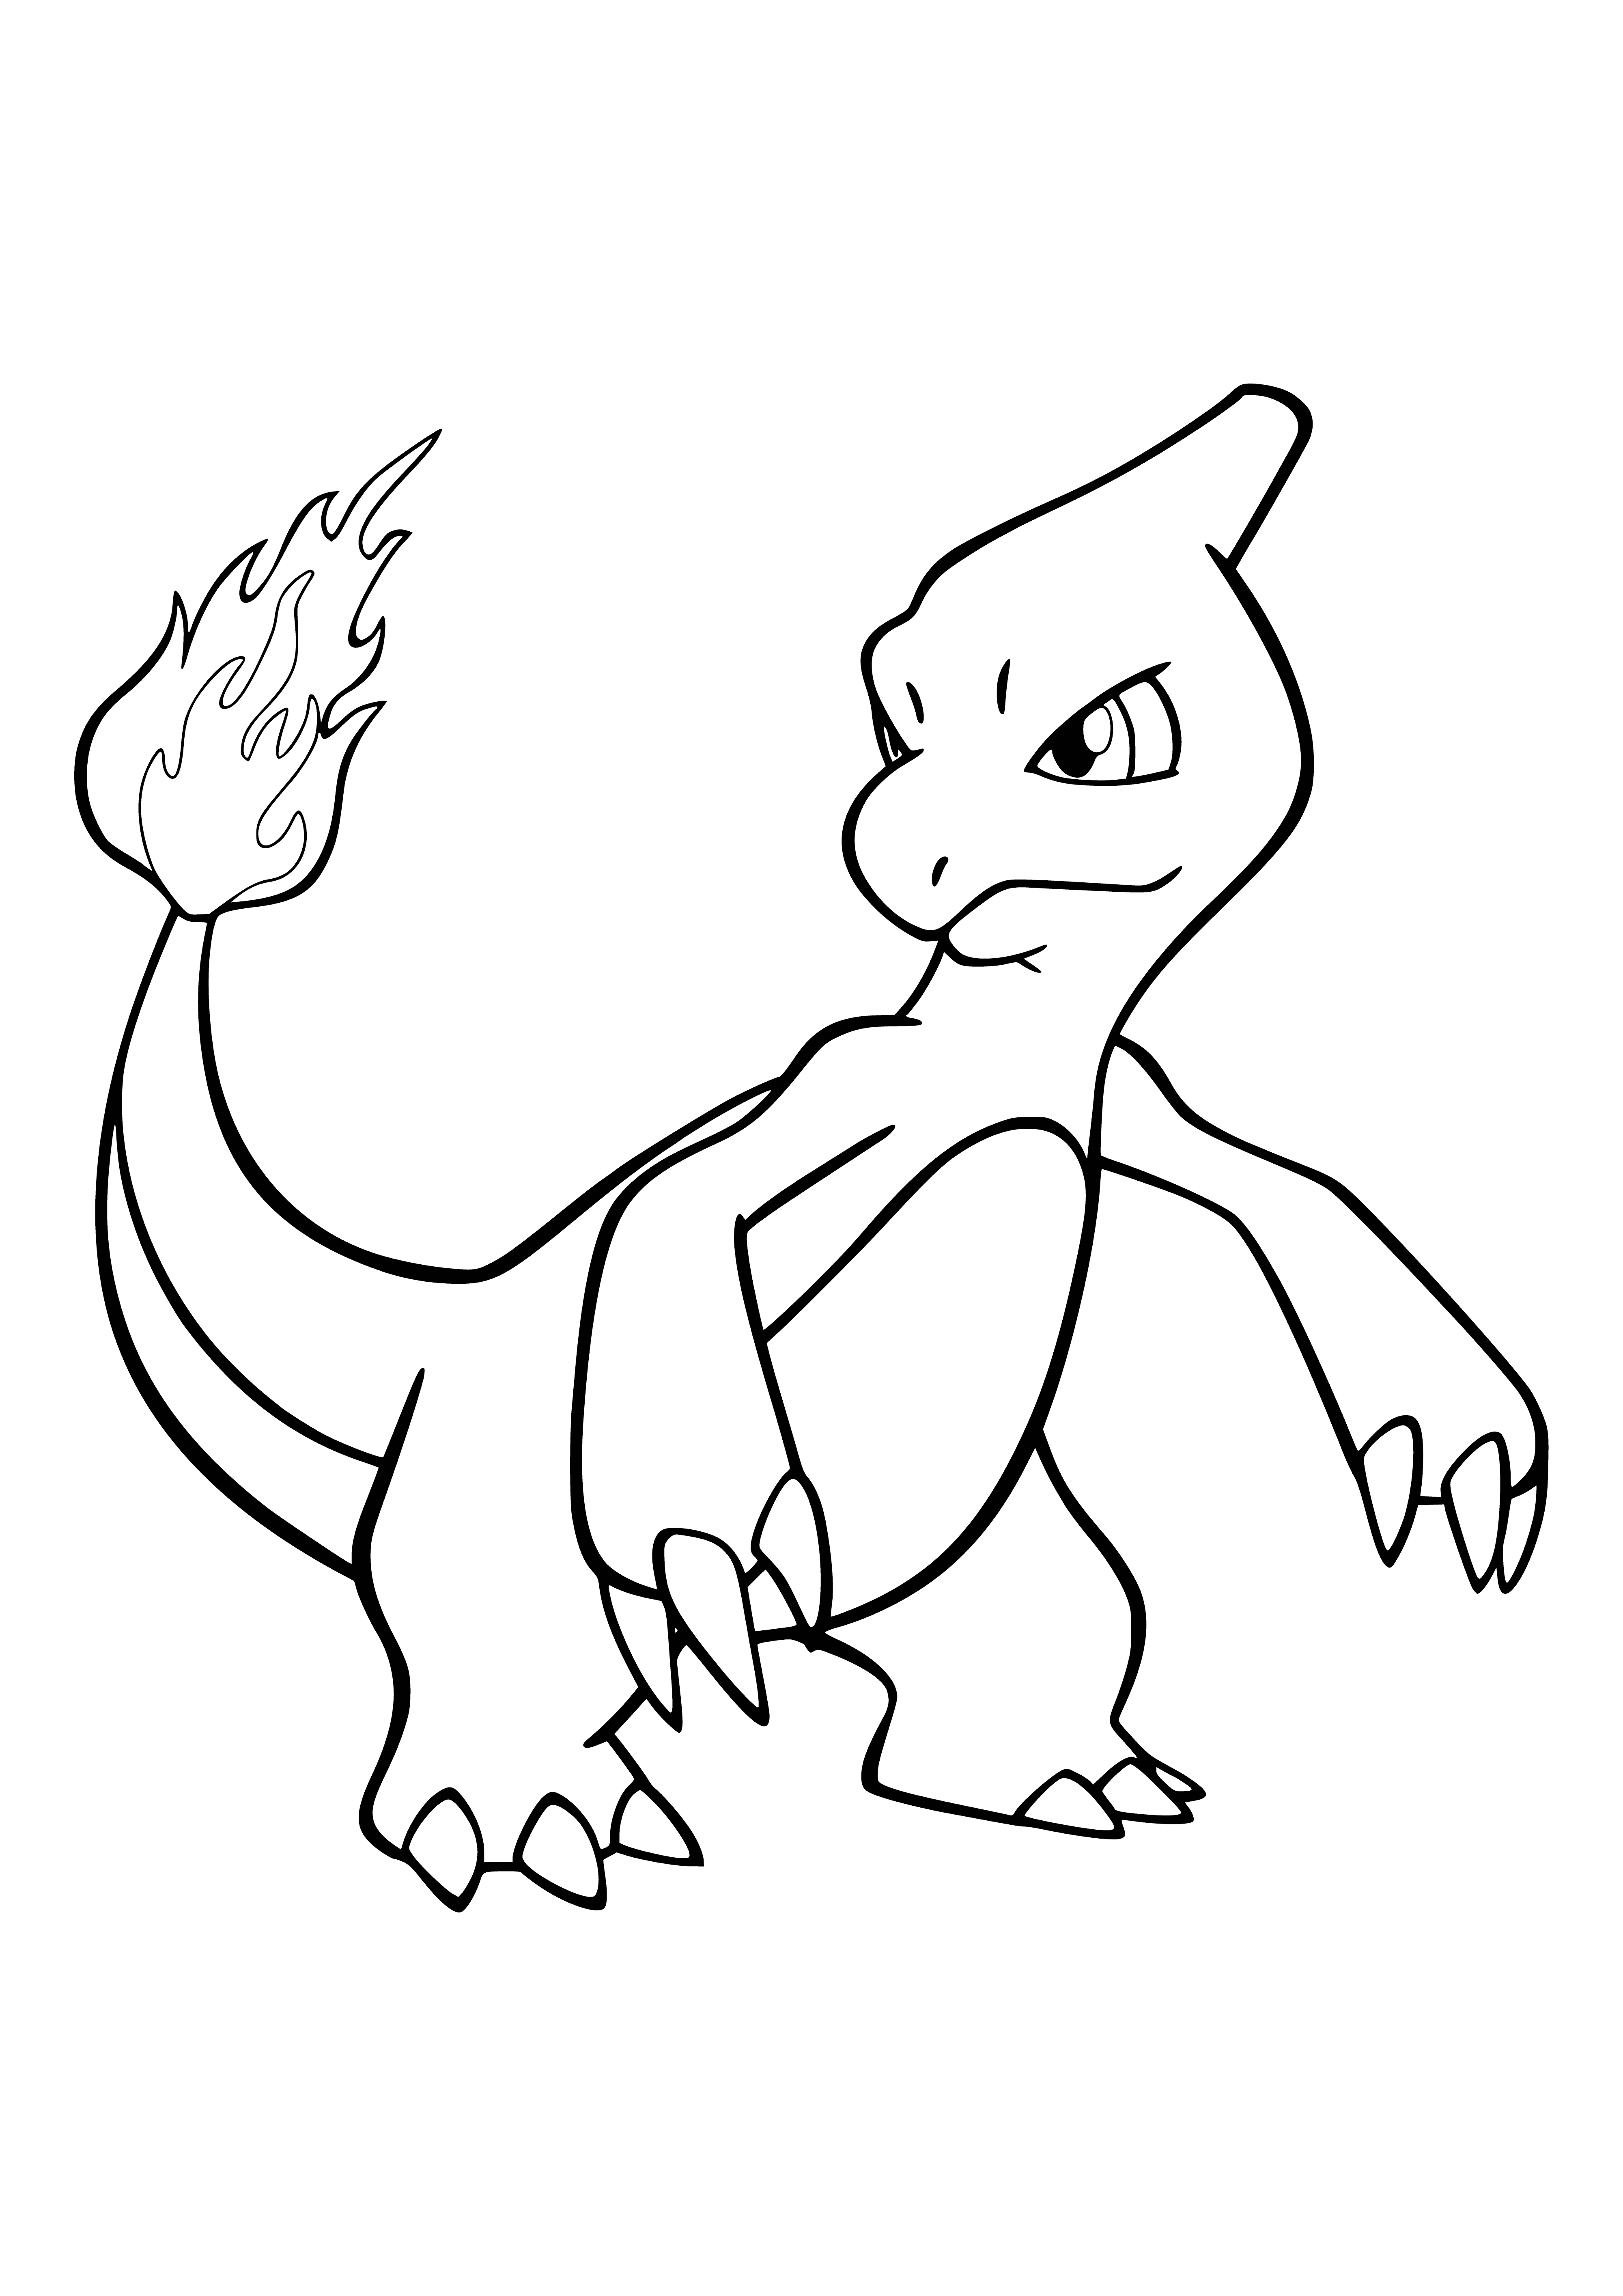 coloring page: Charmeleon is an orange lizard-like Pokémon. It has back stripes, horn, spikes, red eyes, and sharp teeth. Evolves from Charmander and becomes Charizard.